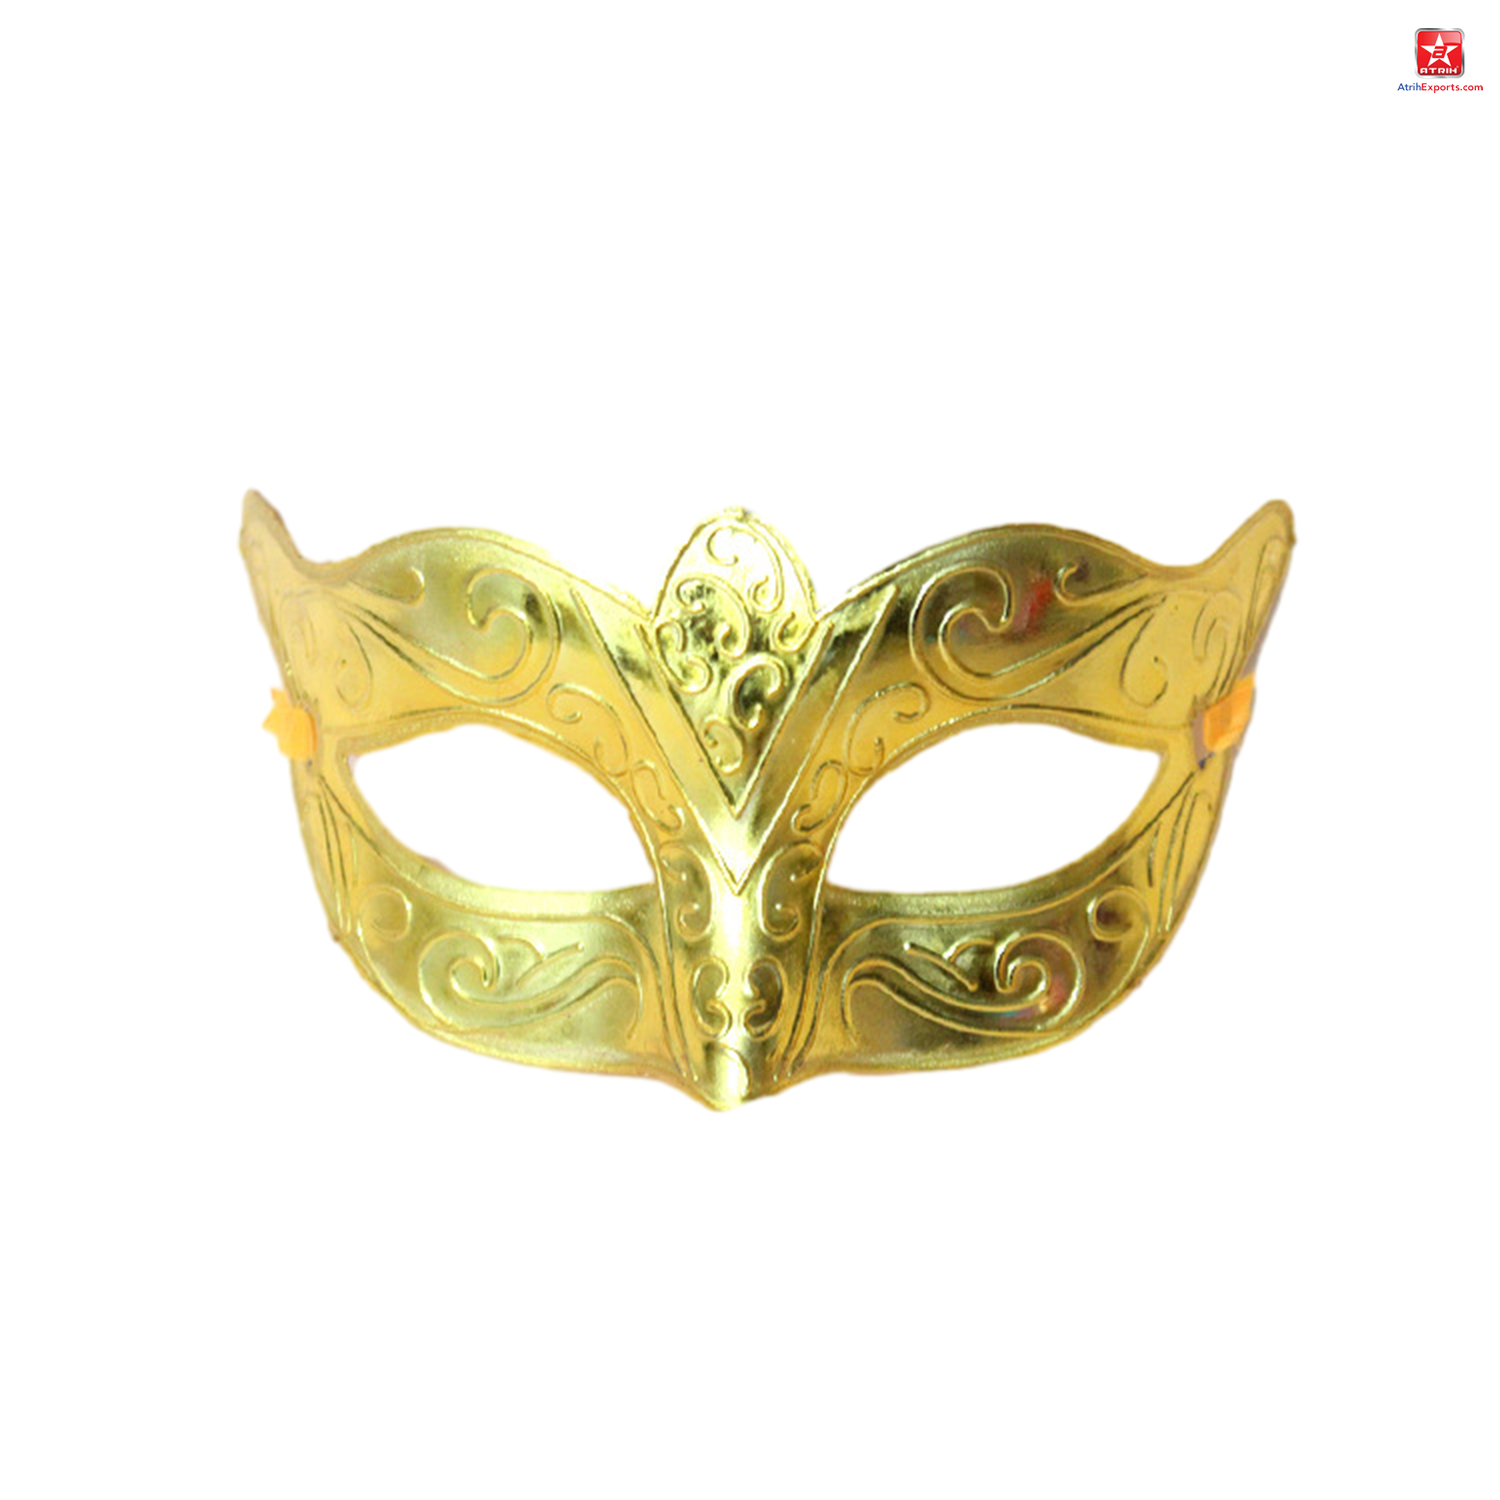 Festival Half Face Fairy Mask The Halloween Party Performs Masquerade Masks